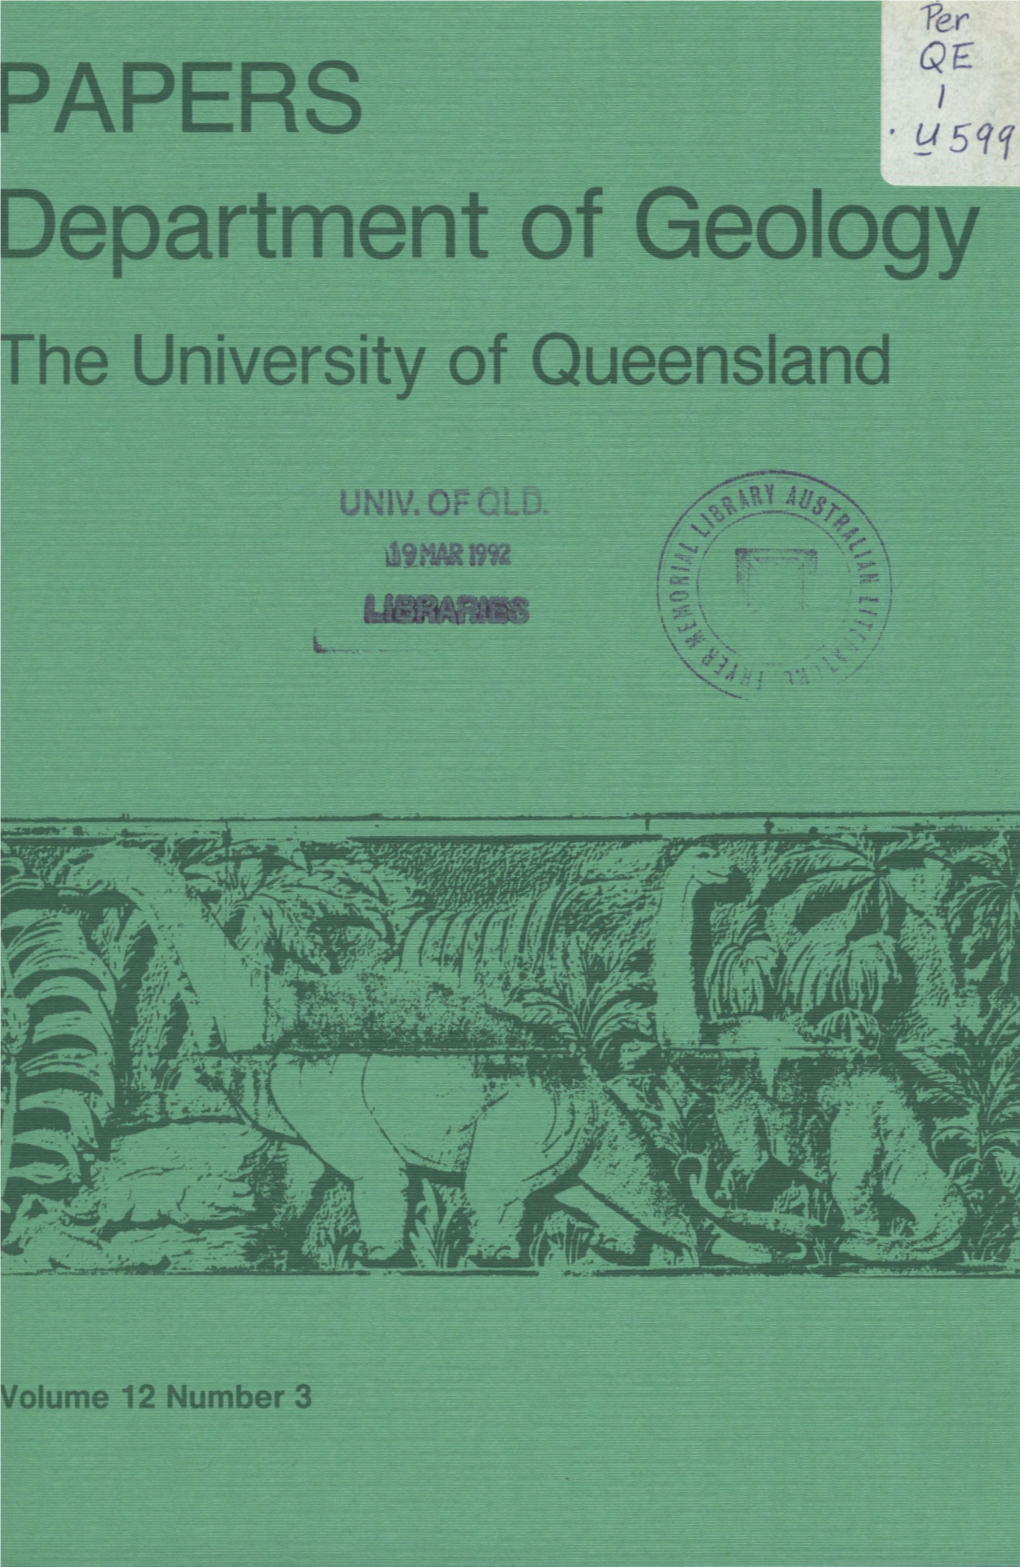 UQ Geology Papers 12 Ns 3